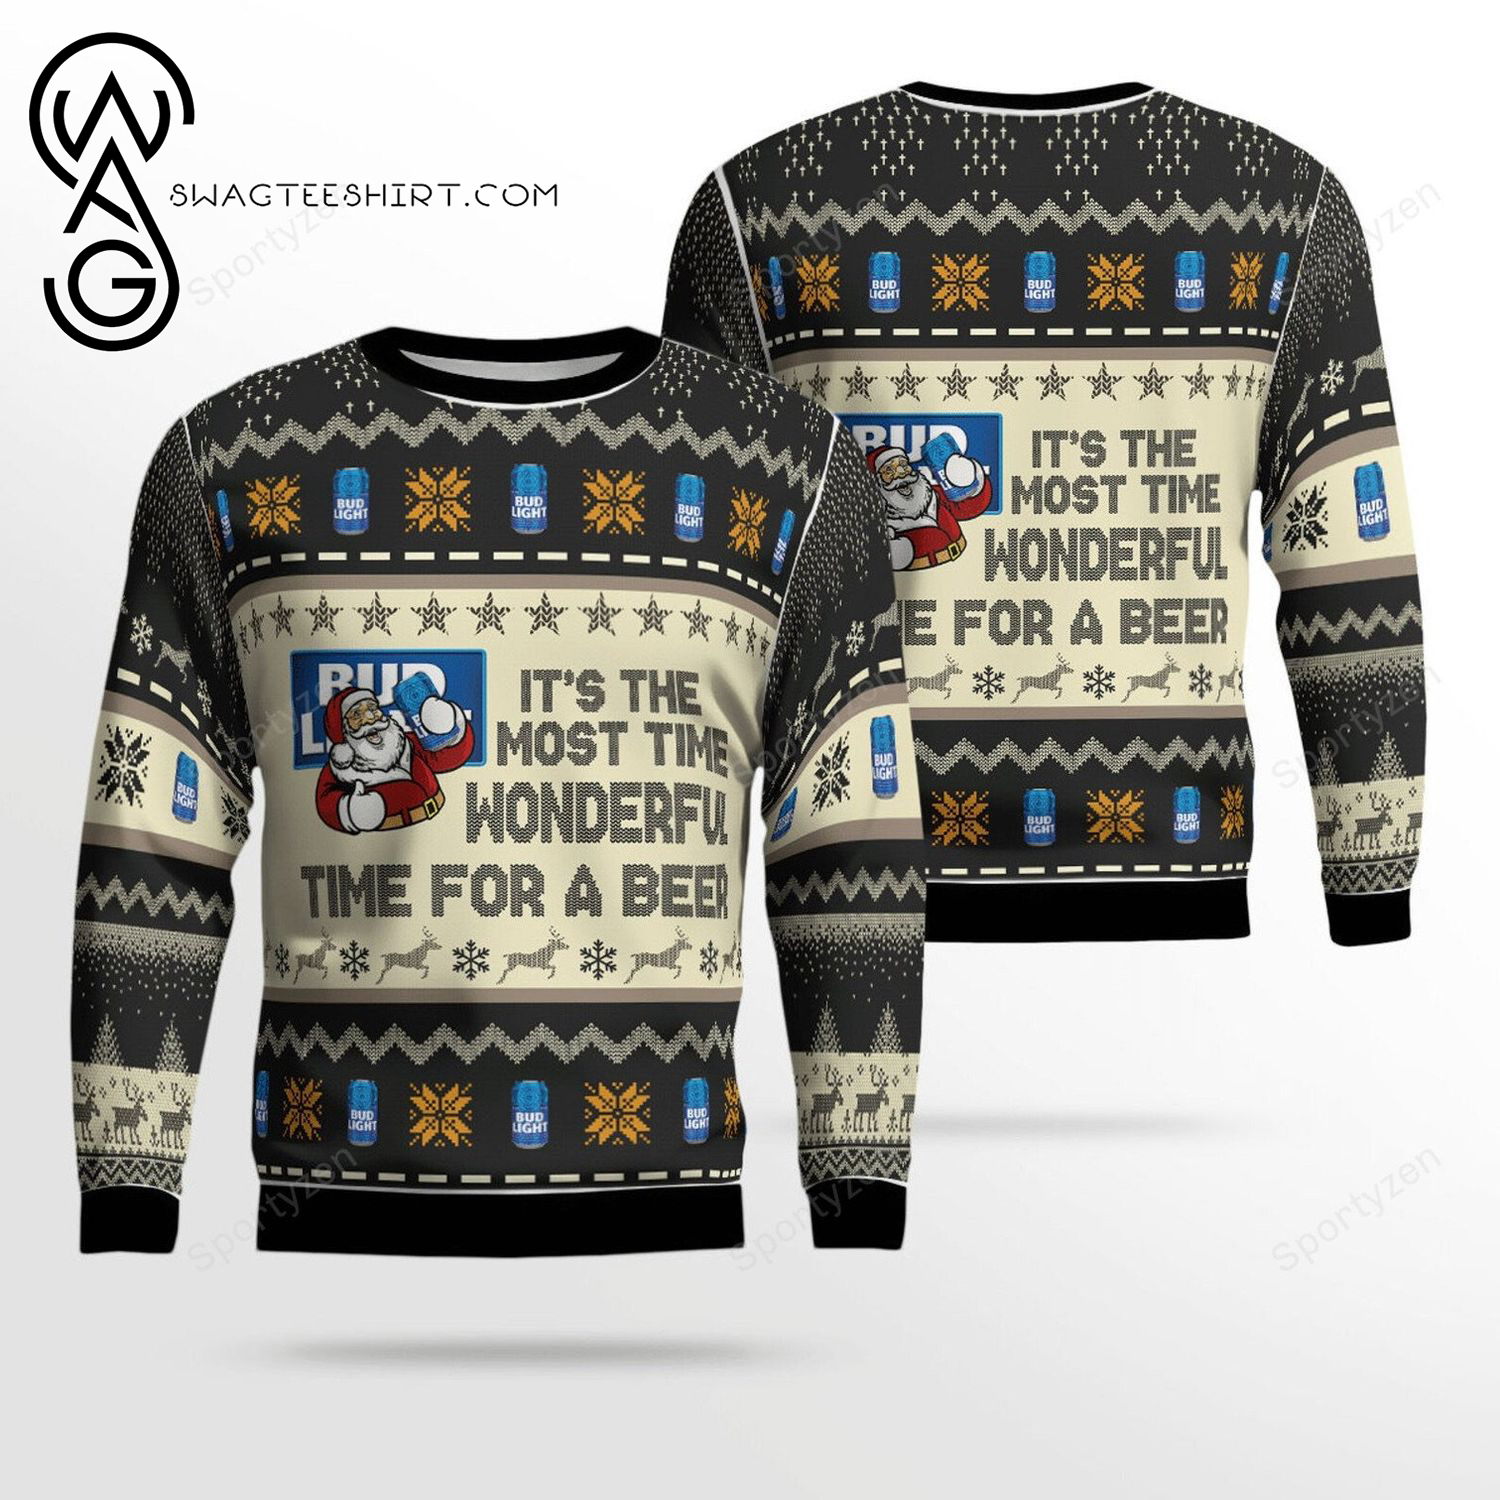 Santa Claus Bud Light It's The Most Wonderful Time For A Beer Full Print Ugly Christmas Sweater